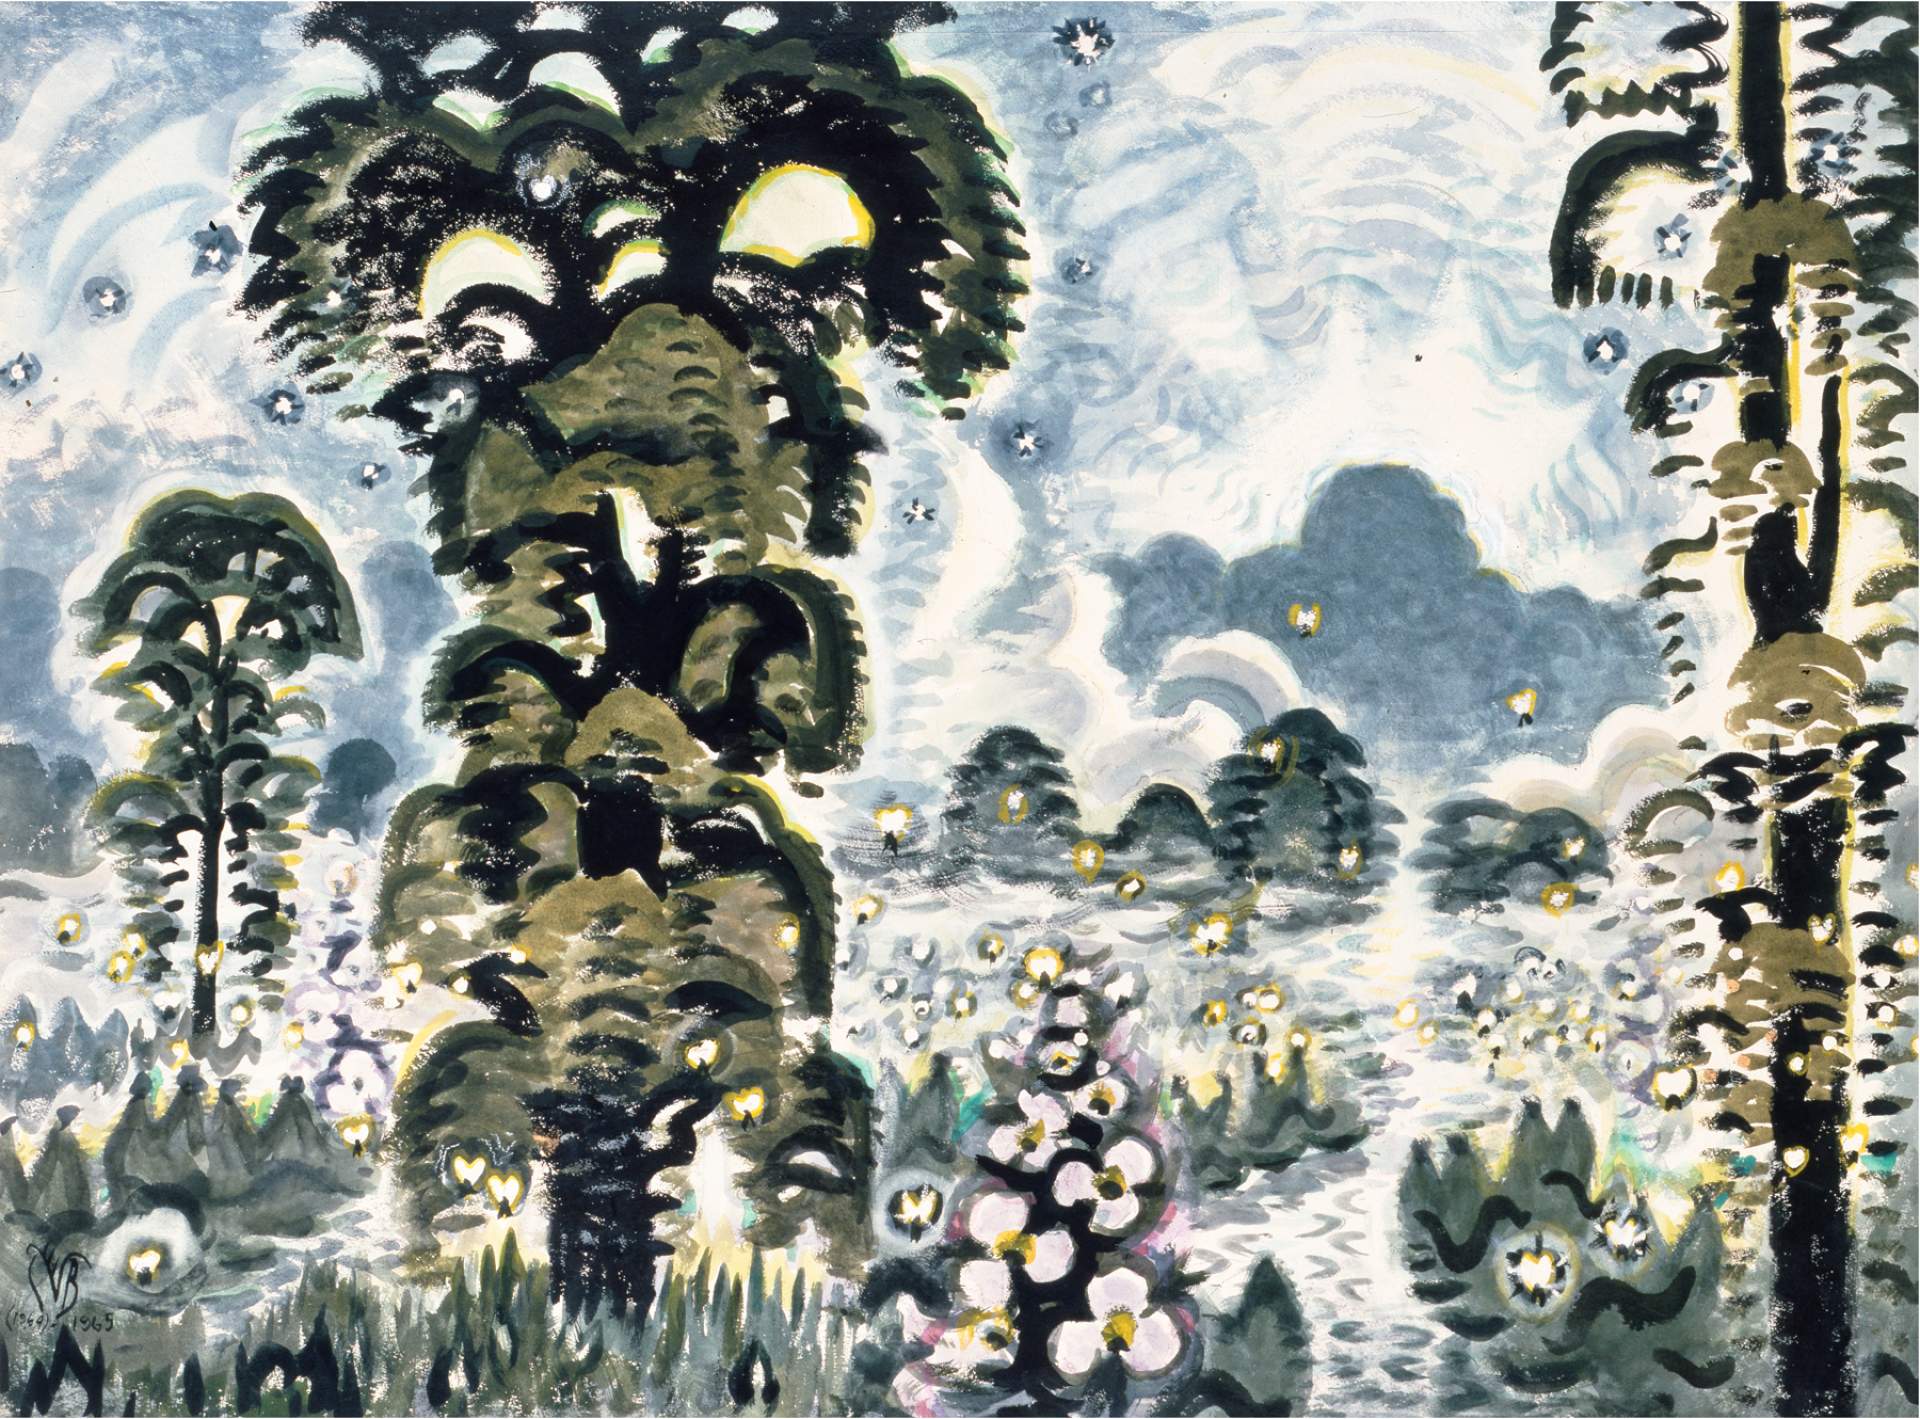 The First Exhibition: 50 Years with Charles E. Burchfield